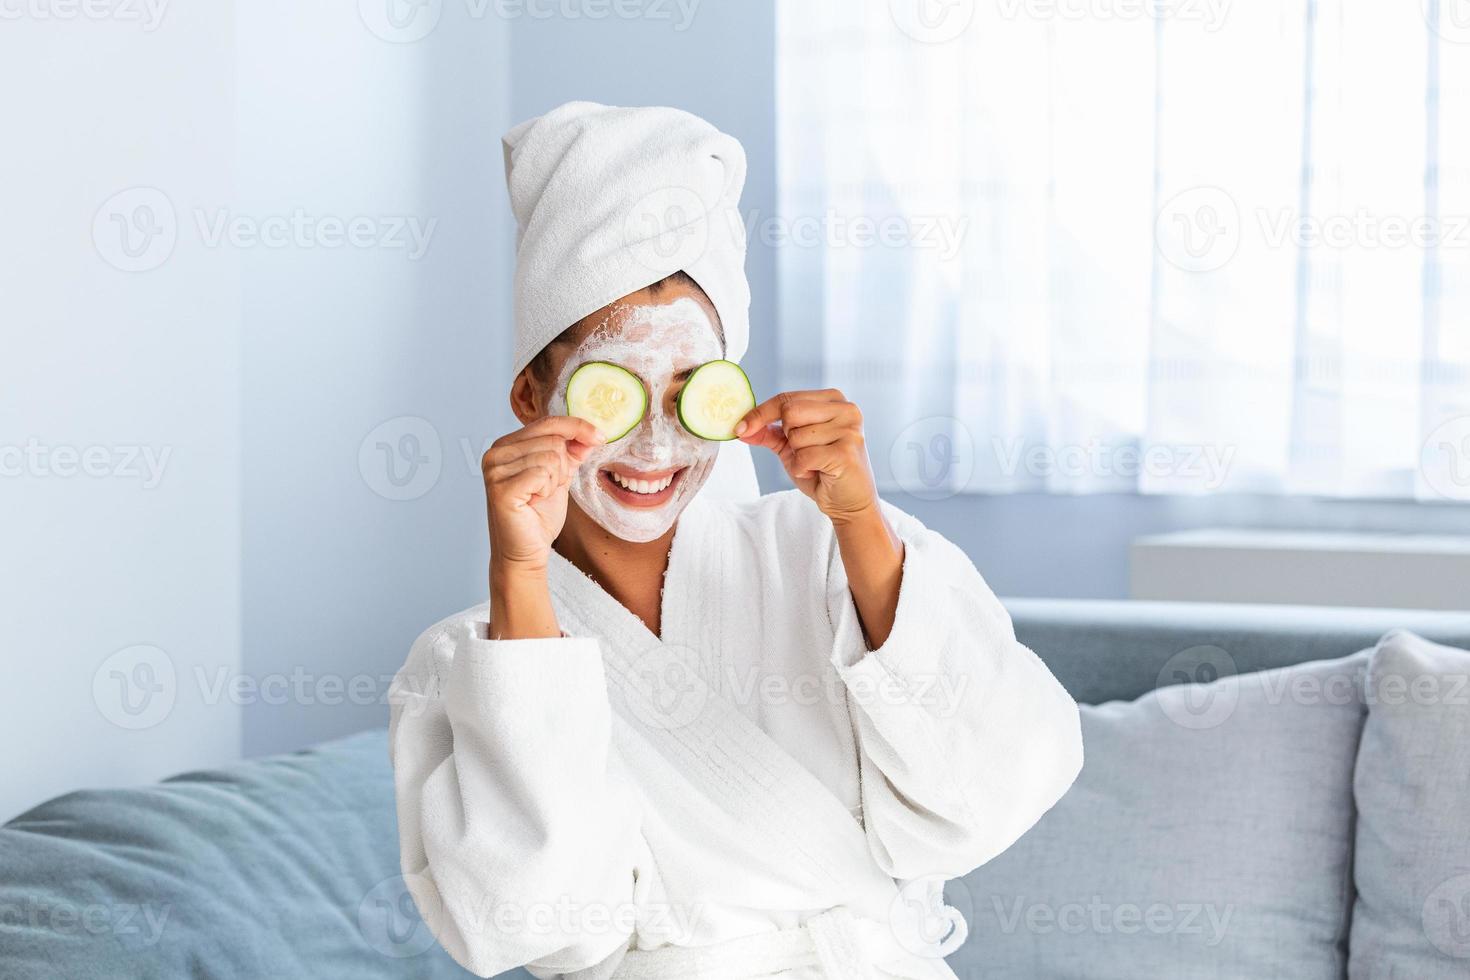 Woman with facial mask and cucumber slices in her hands. Beautiful young woman with facial mask on her face holding slices of fresh cucumber. Young woman with clay facial mask holding cucumber slices photo